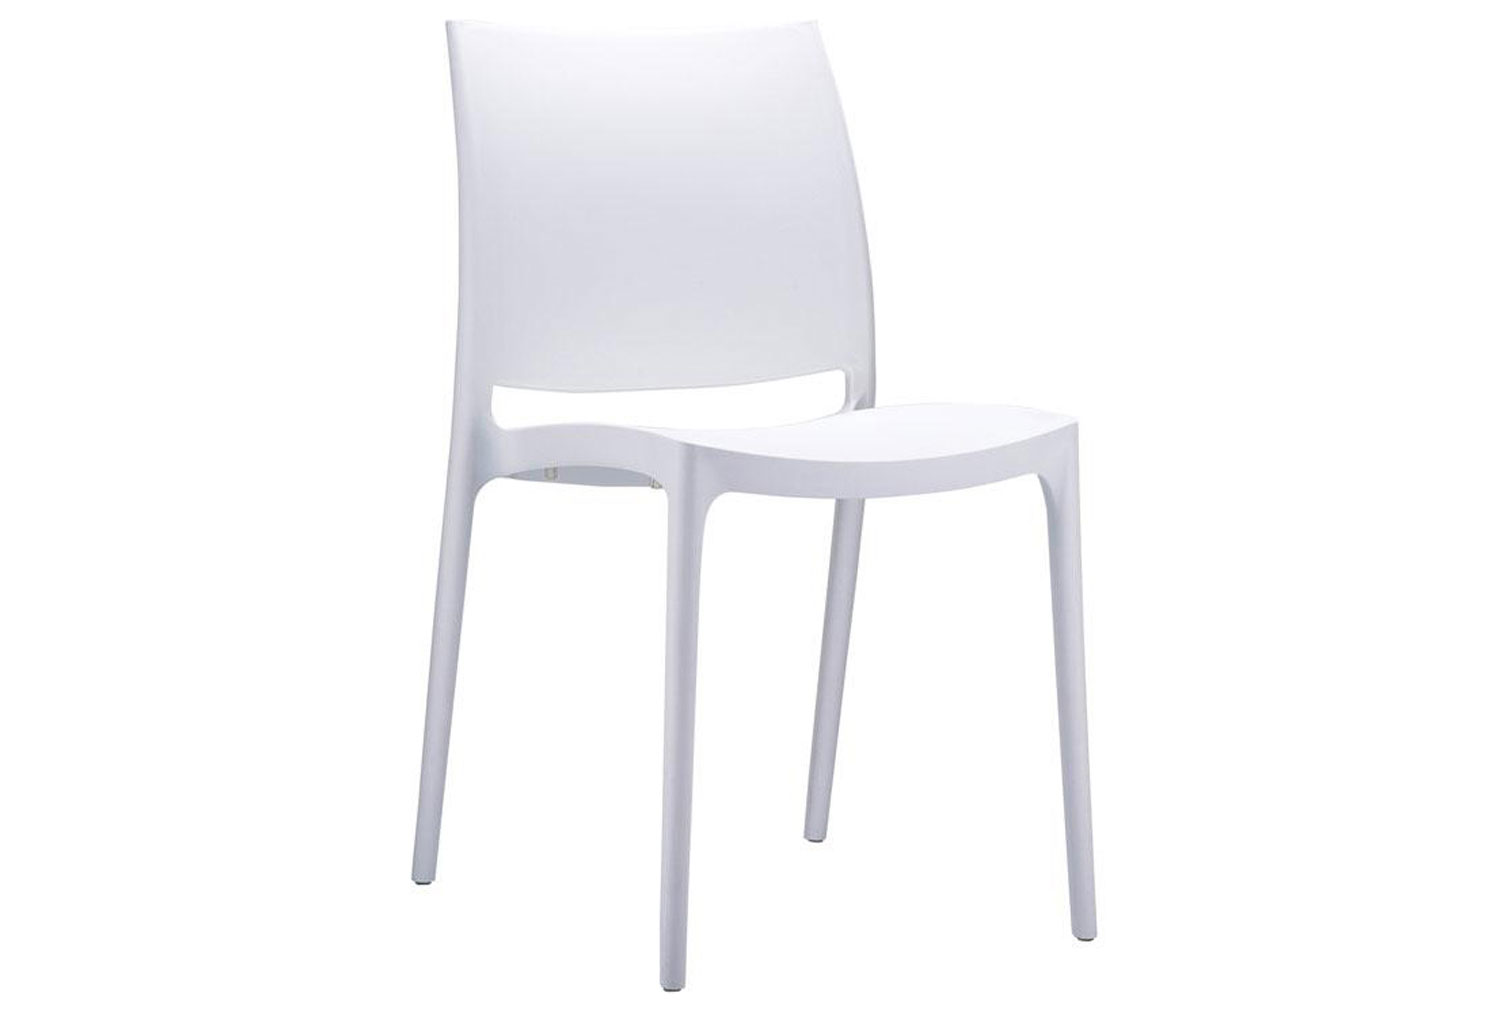 Qty 2 - Sugarloaf Stacking Side Chair, White